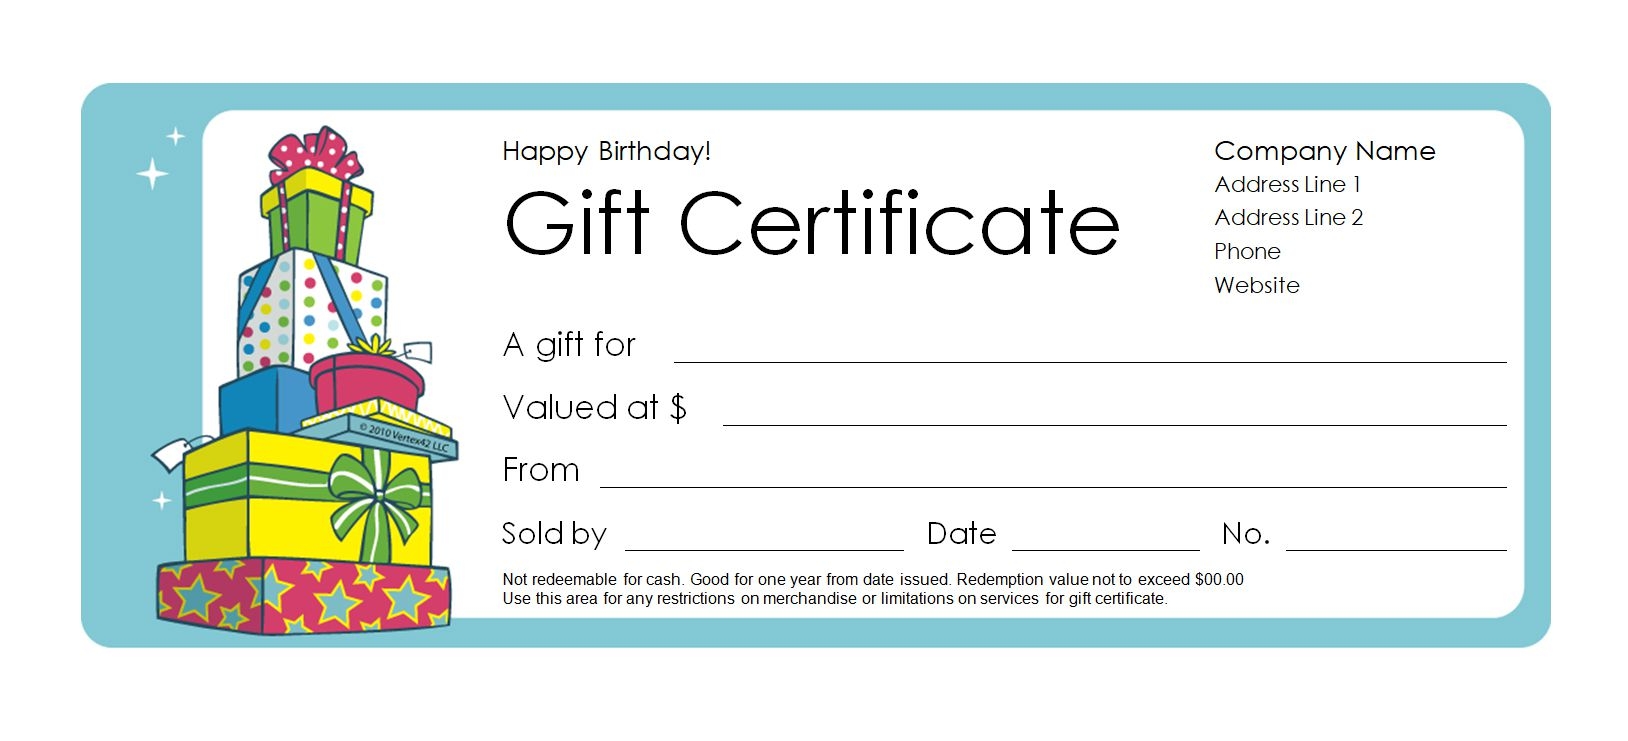 Happy Birthday Gift Certificate Template 173 Free Templates You Can